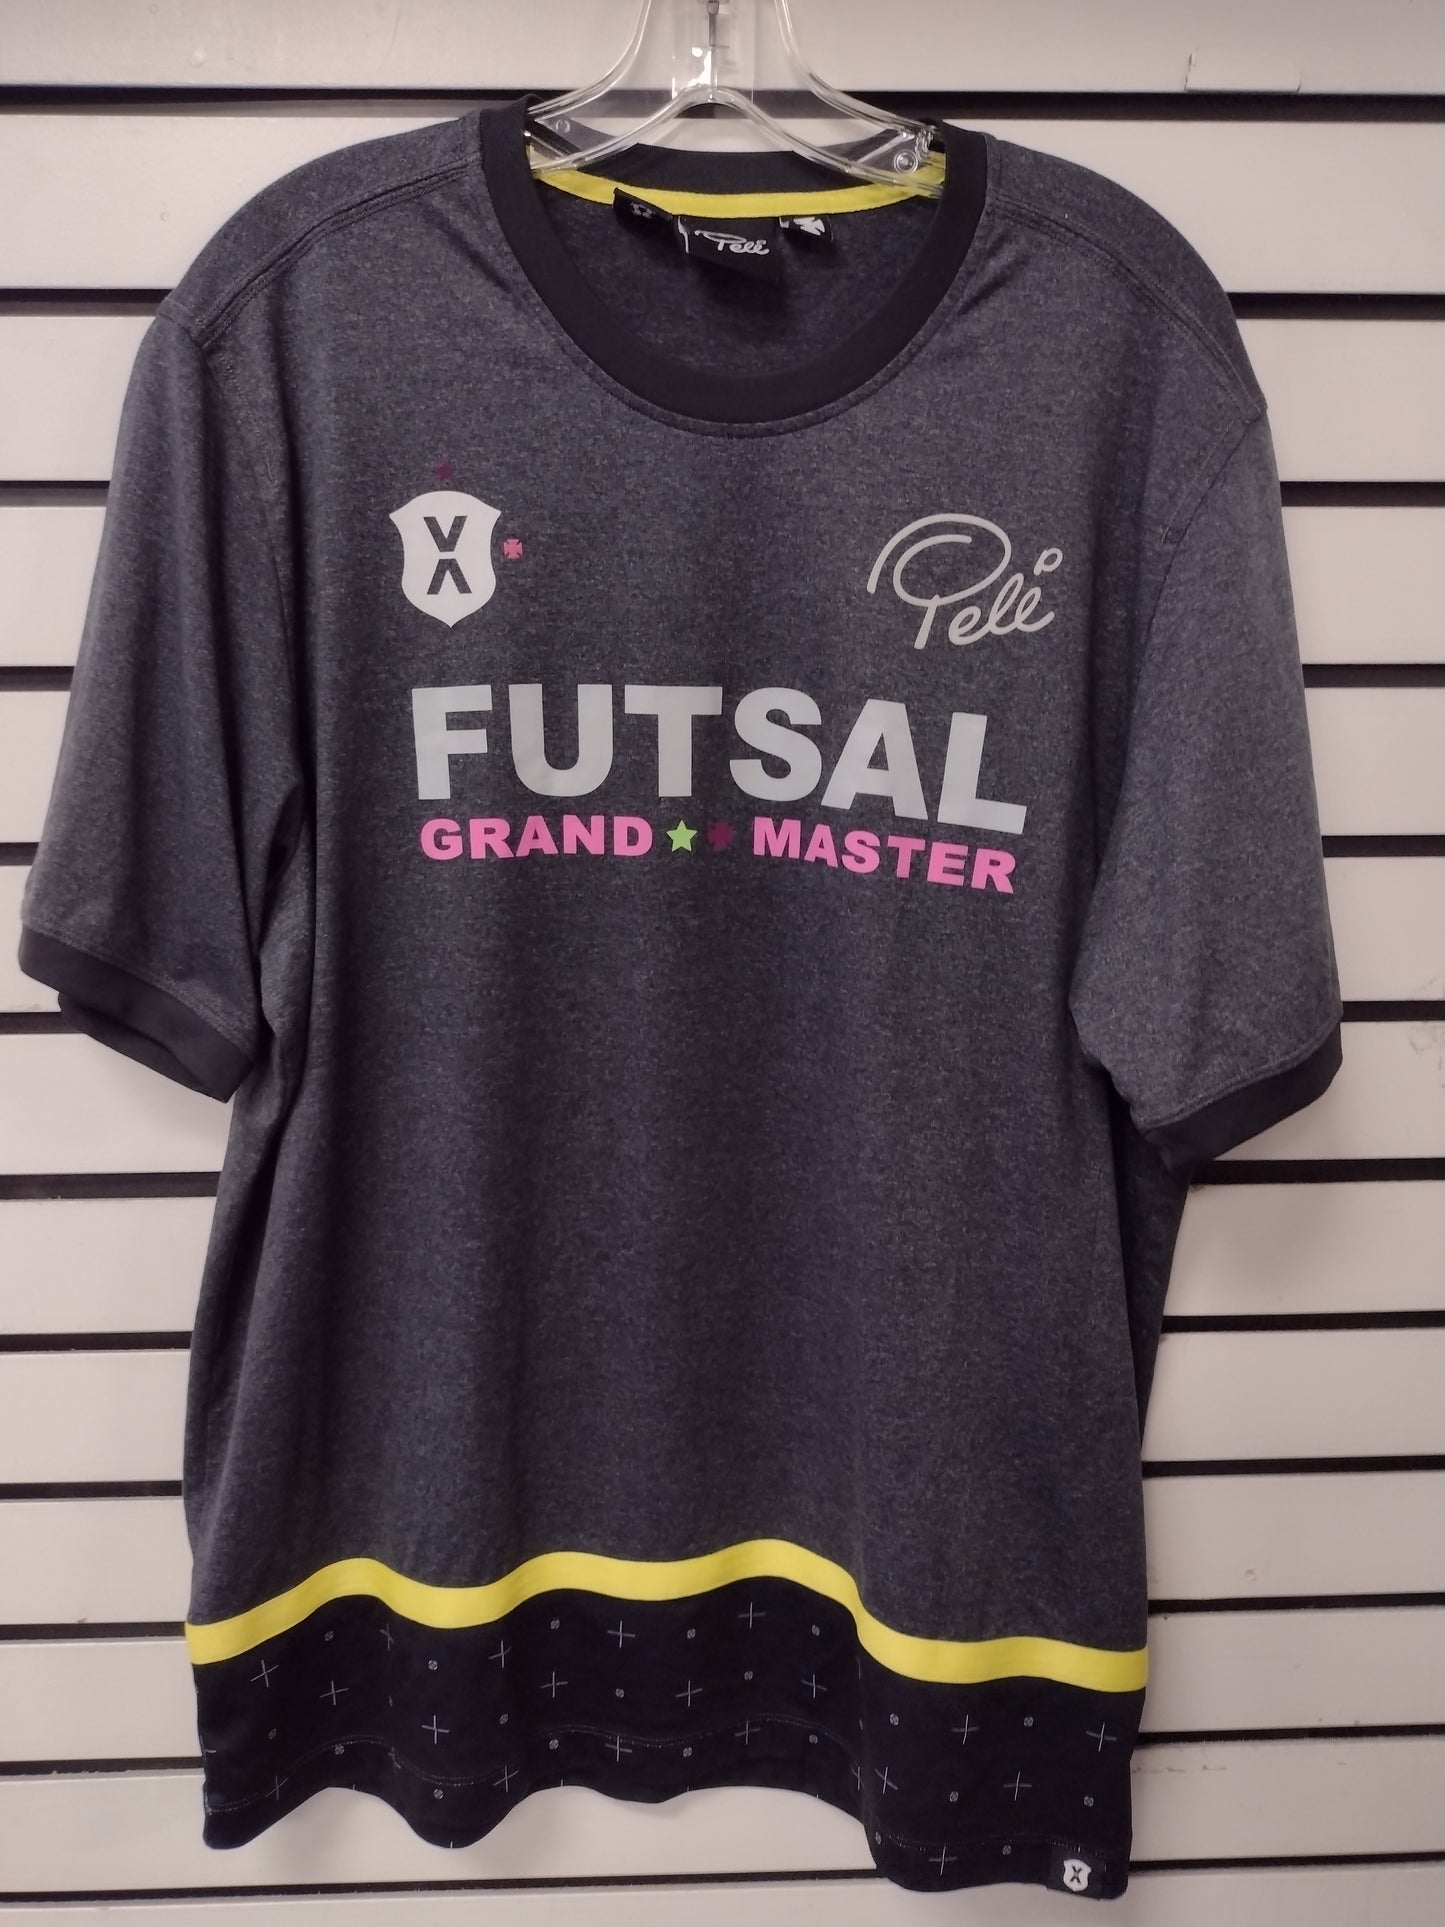 Pele Sports Futsal Grand Master Jersey Mens Large  *** this is a vintage used jersey***